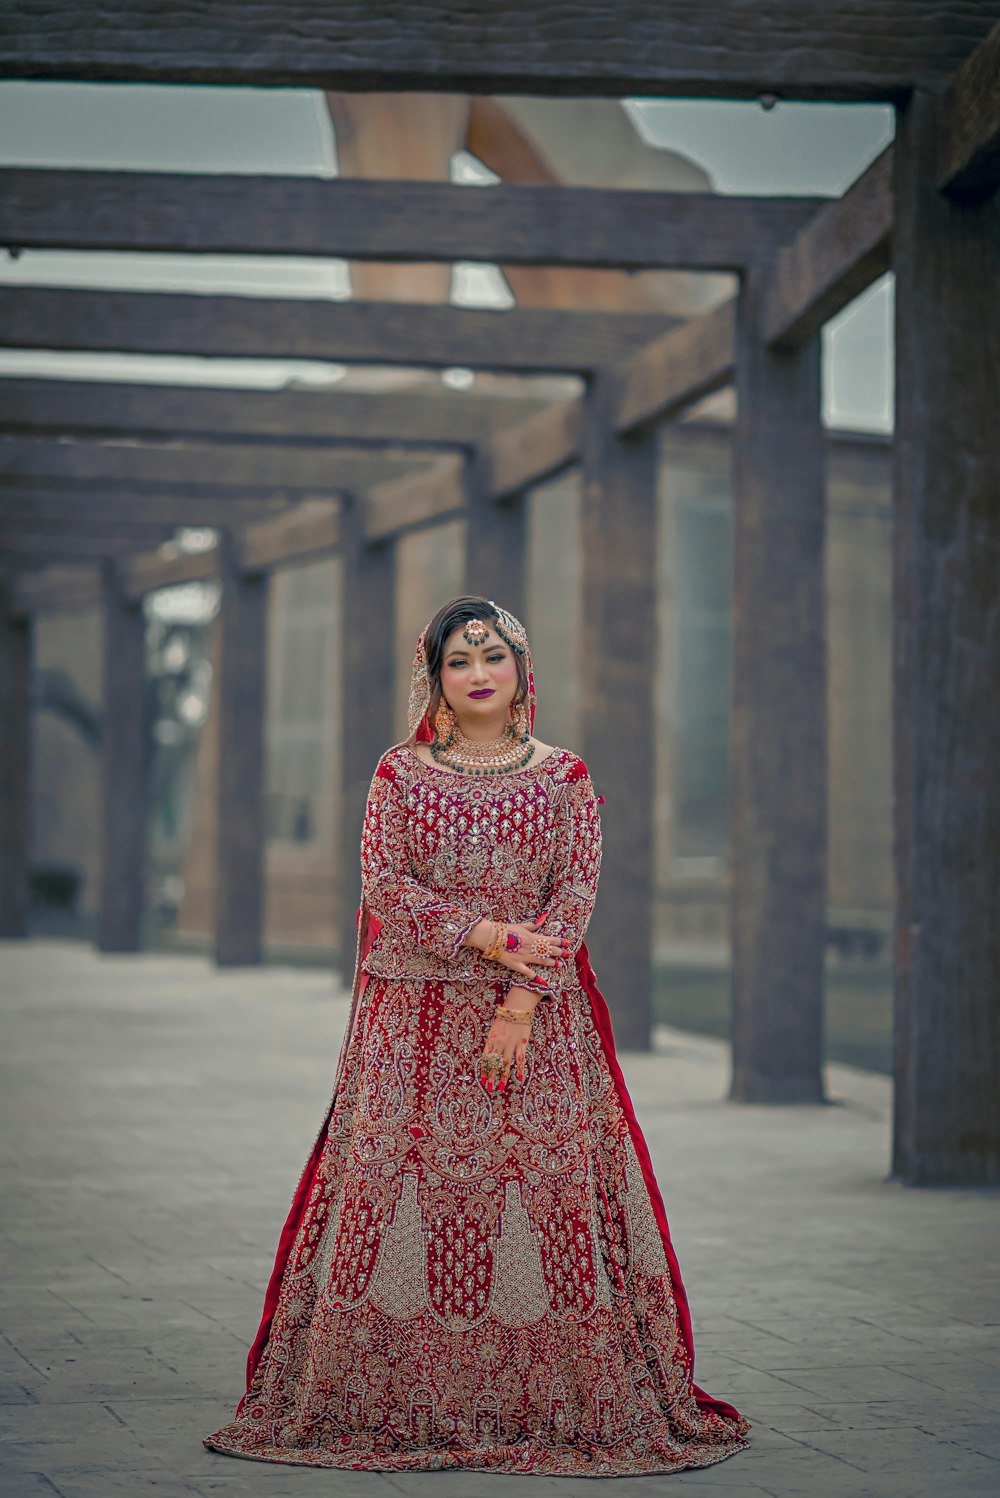 a woman in a red and gold wedding dress